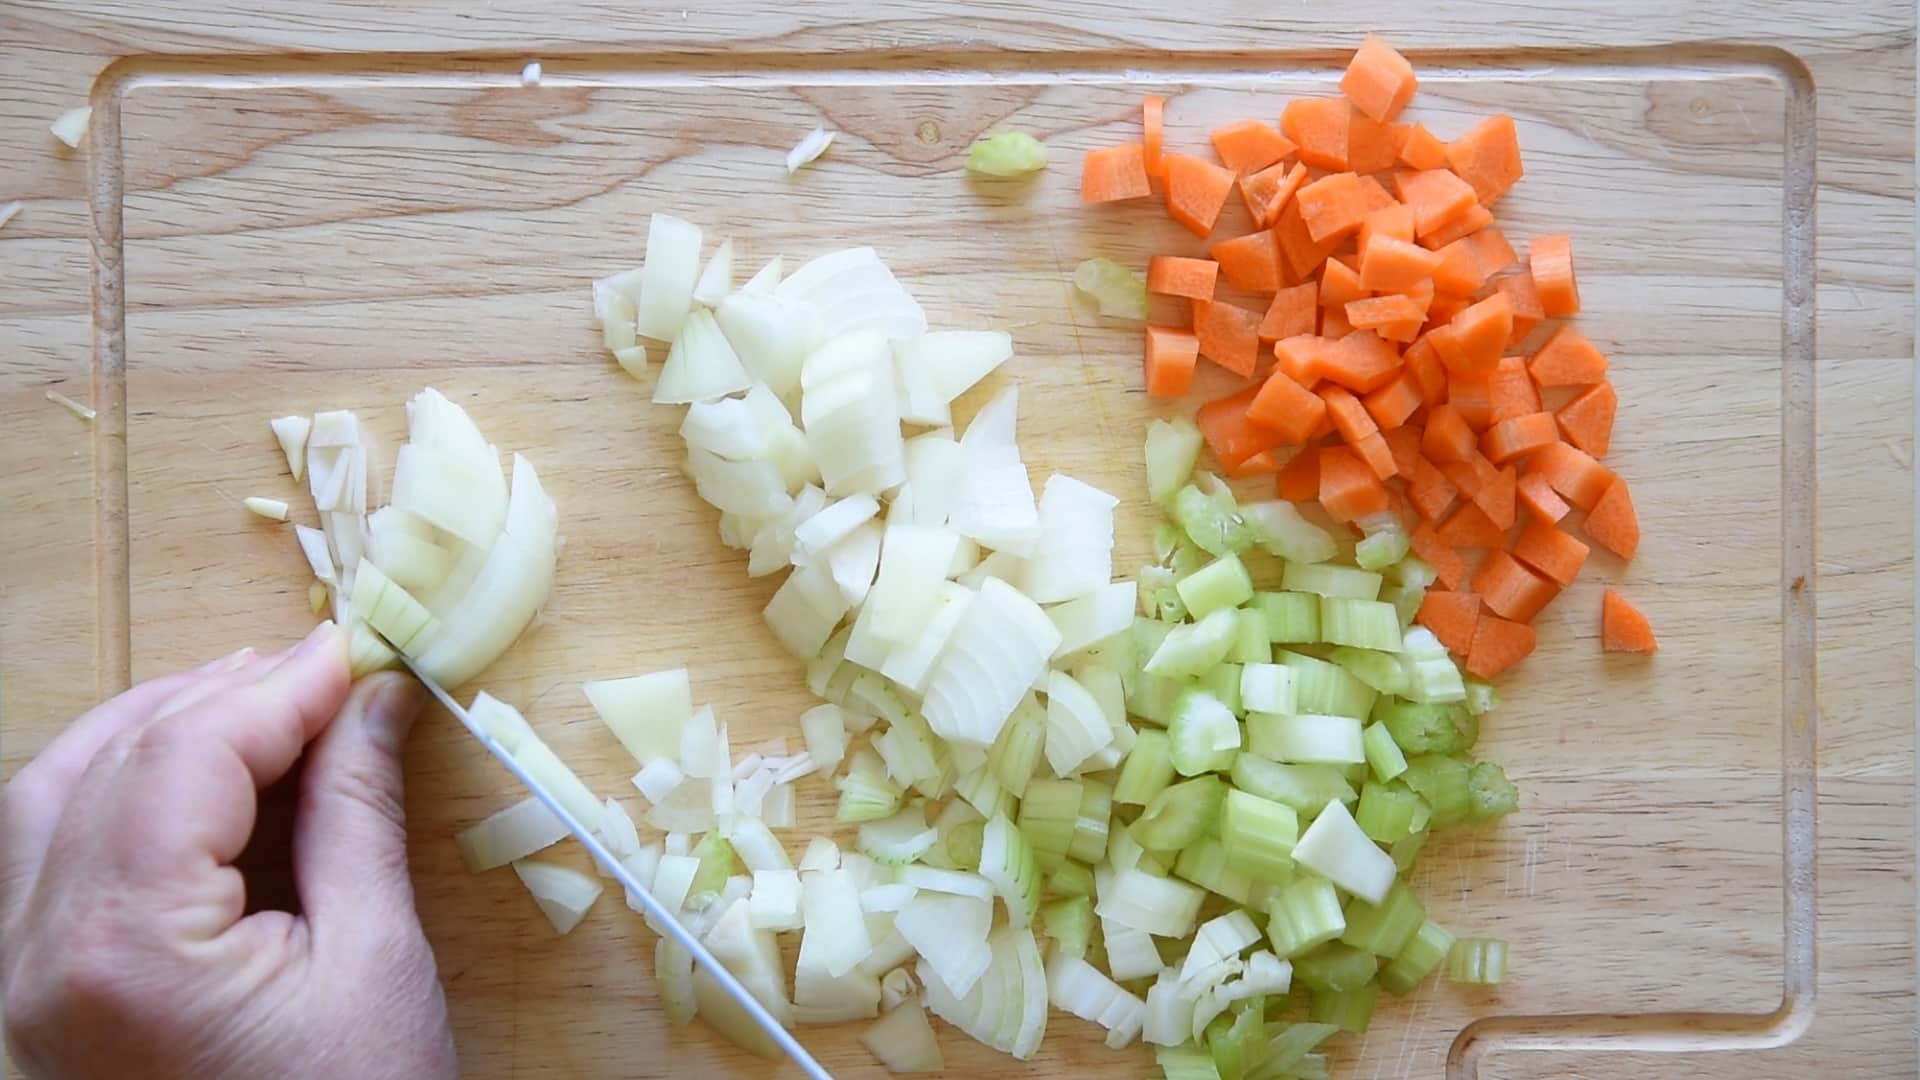 Dice the carrot, celery and onion